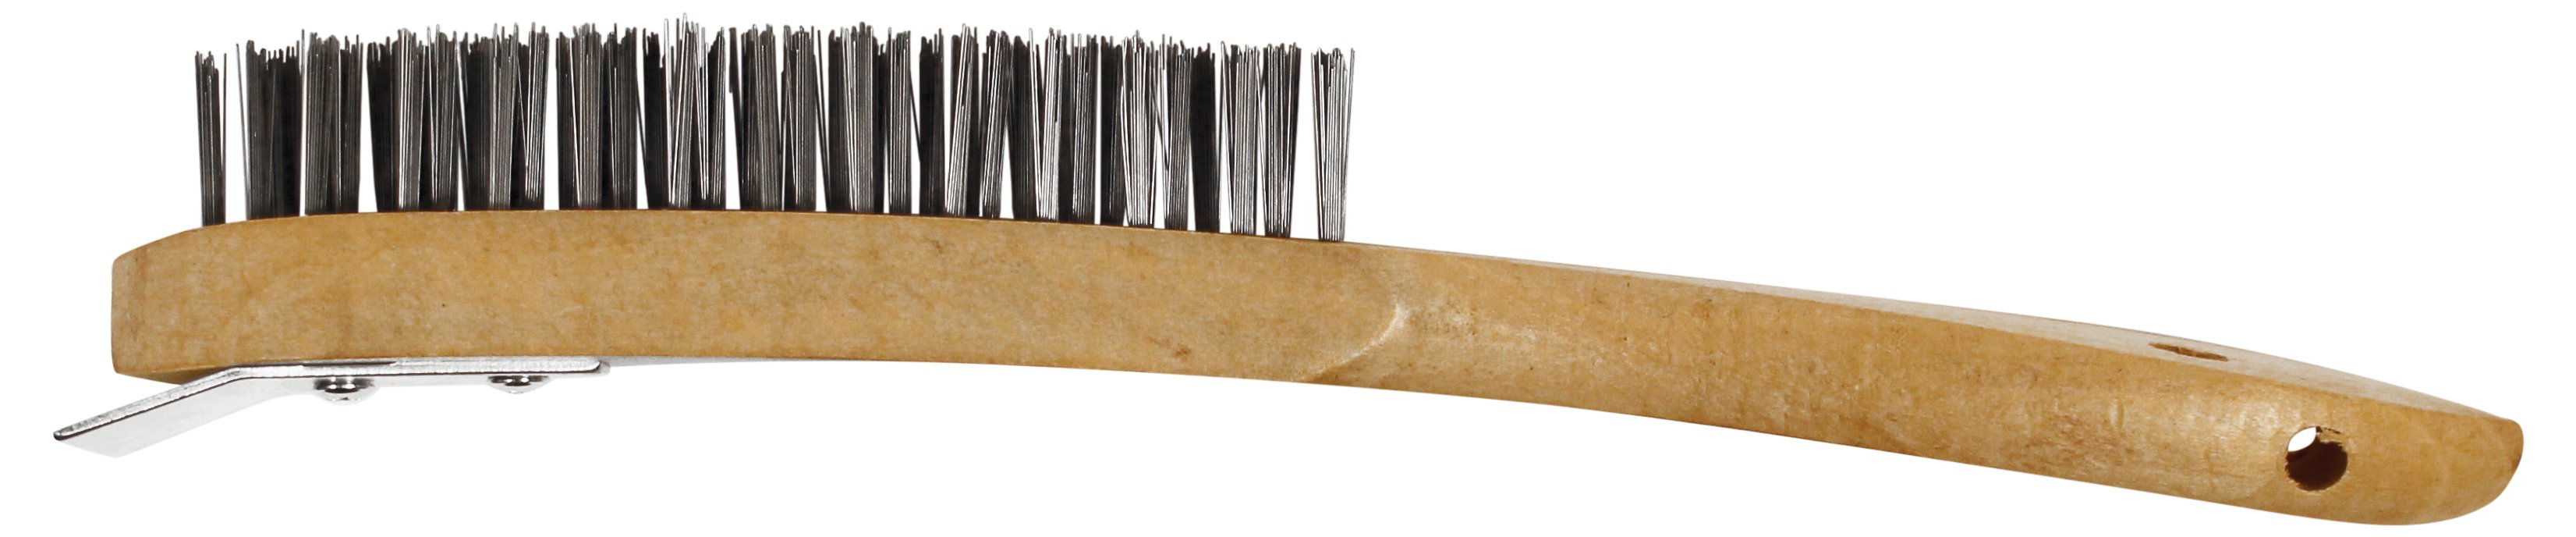 Abracs  4 ROW WOODEN HANDLED BRUSH WITH SCRAPER 